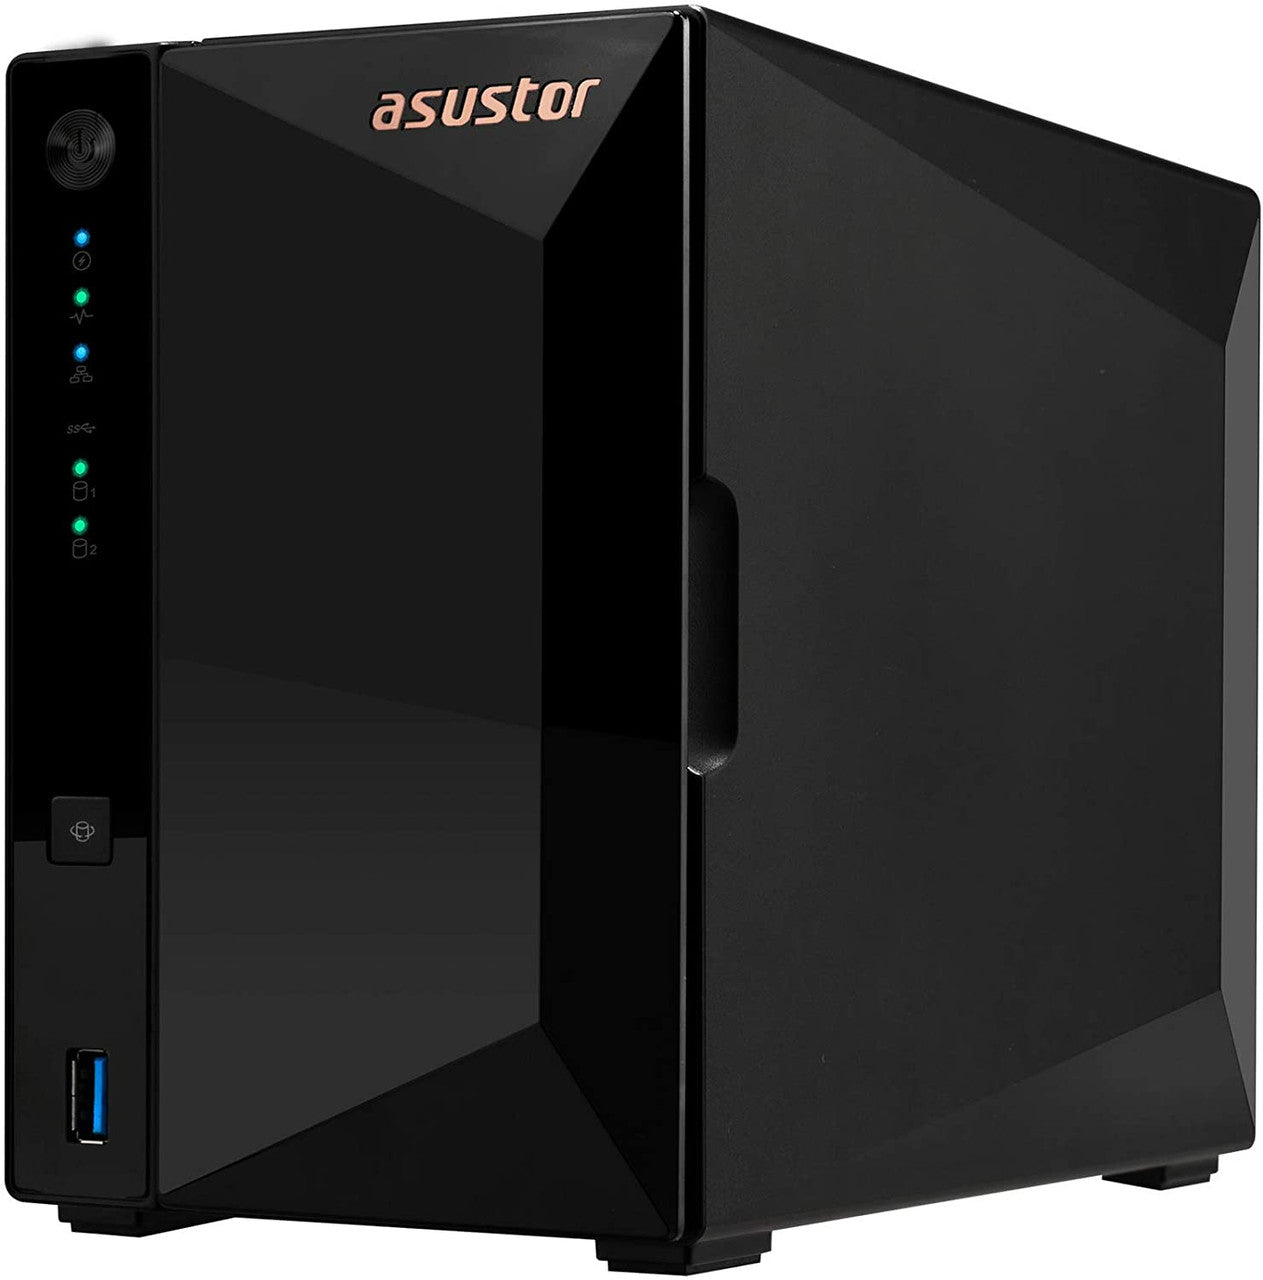 Asustor AS3302T 2-Bay Drivestor 2 PRO NAS with 2GB RAM and 16TB (2x8TB) Western Digital RED PRO Drives Fully Assembled and Tested